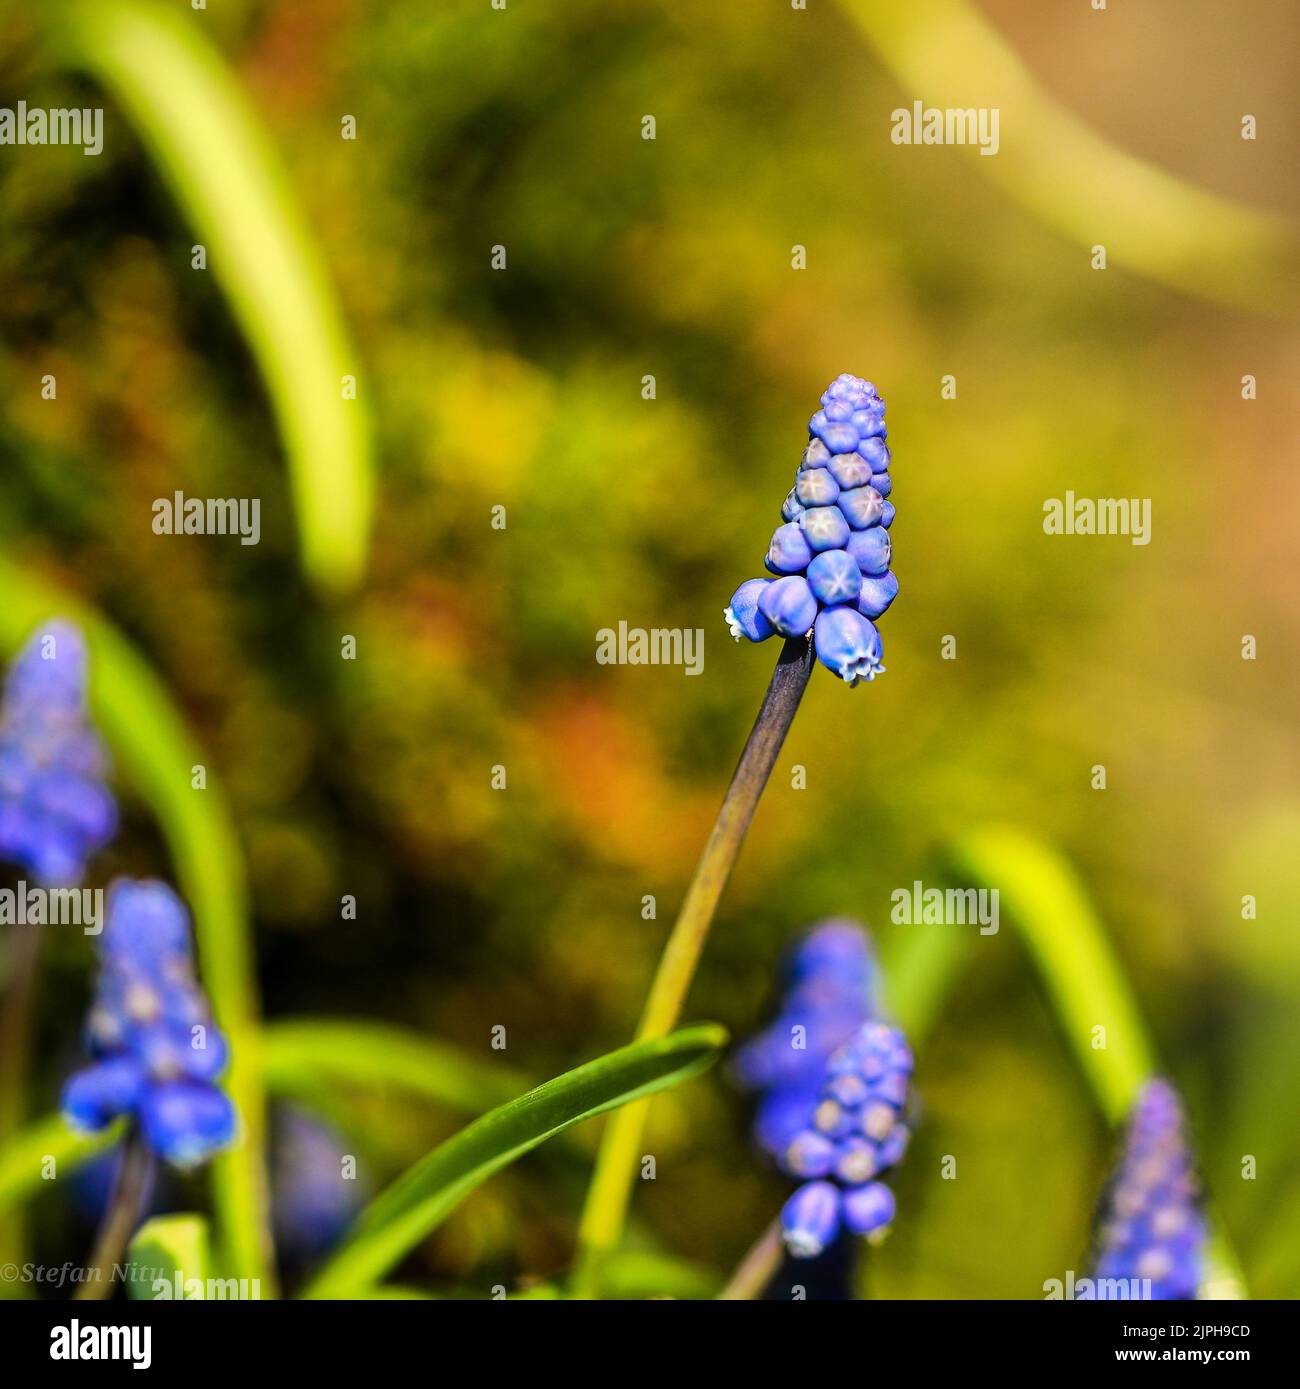 A closeup shot of a grape hyacinth flower on a sunny day in a blurred background Stock Photo